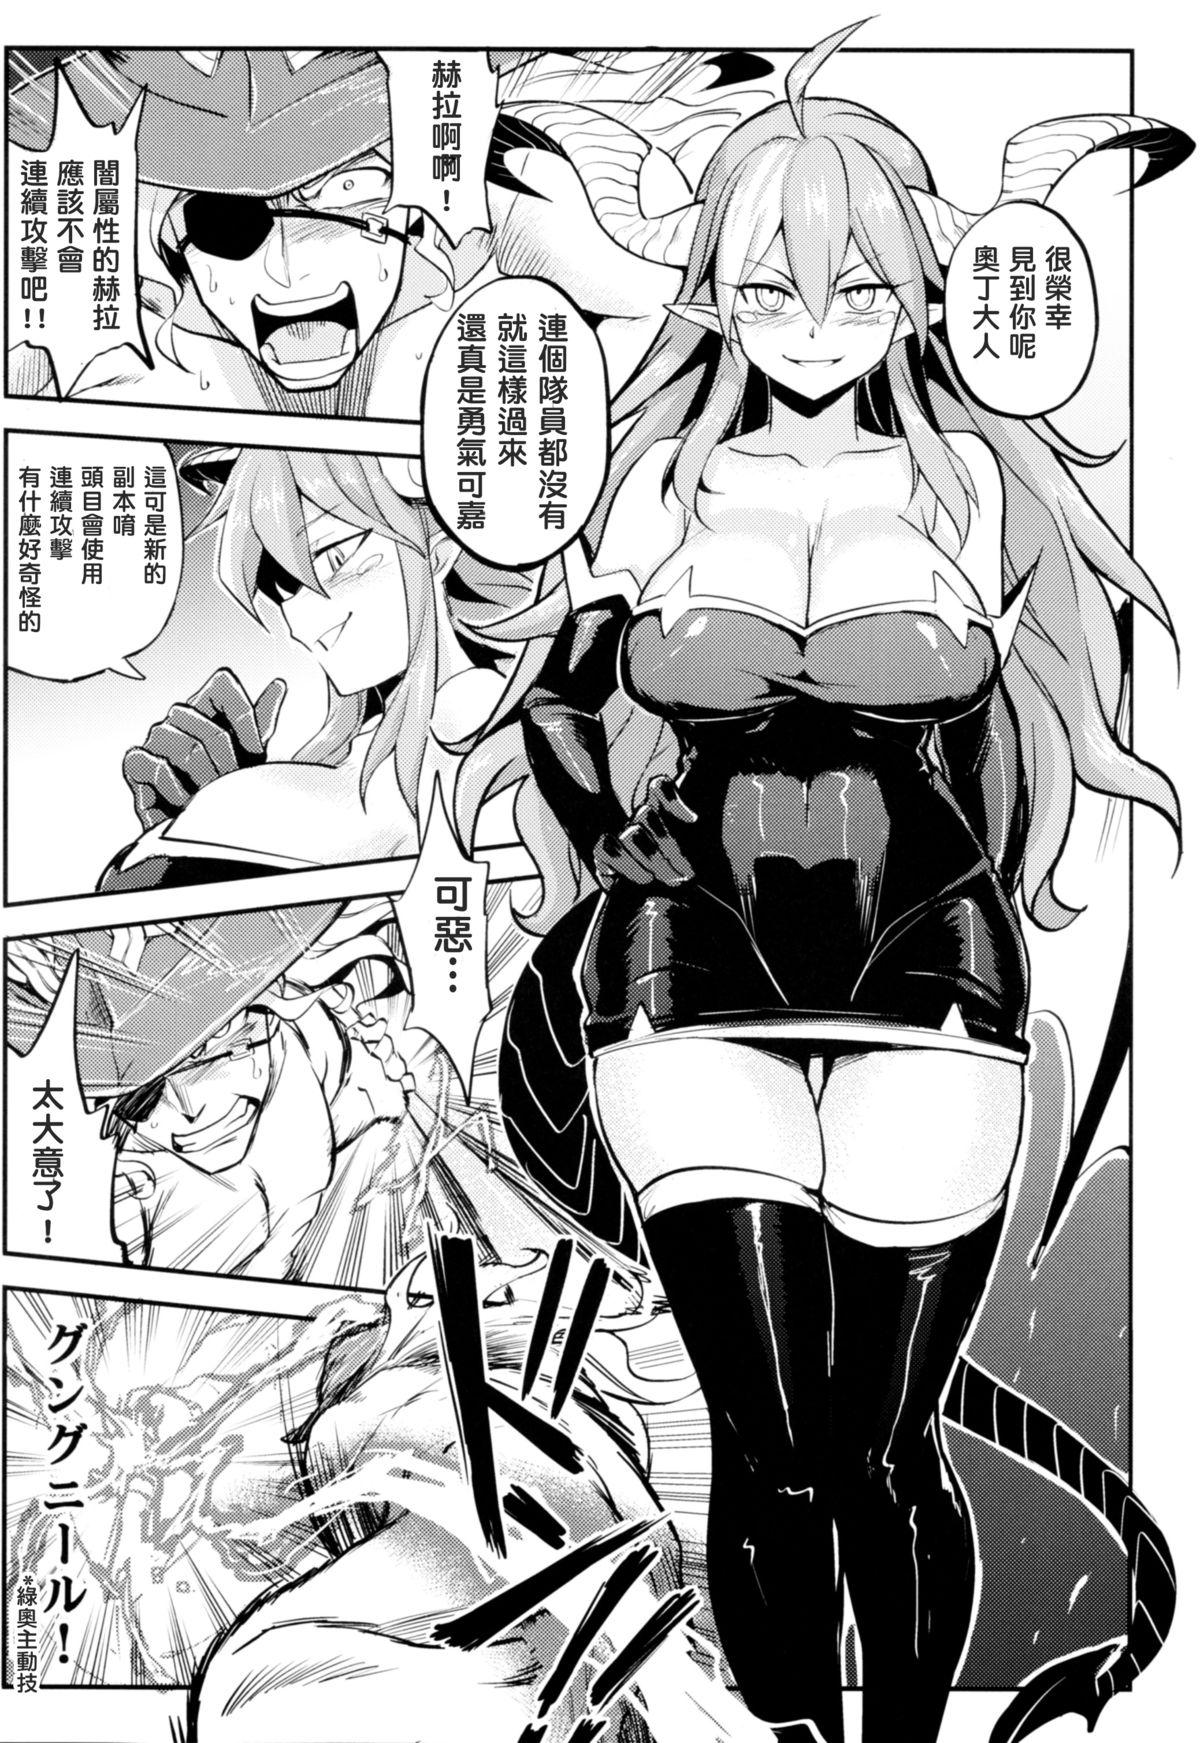 Sexcams Ganbare! Odin-sama! - Puzzle and dragons Celeb - Page 7